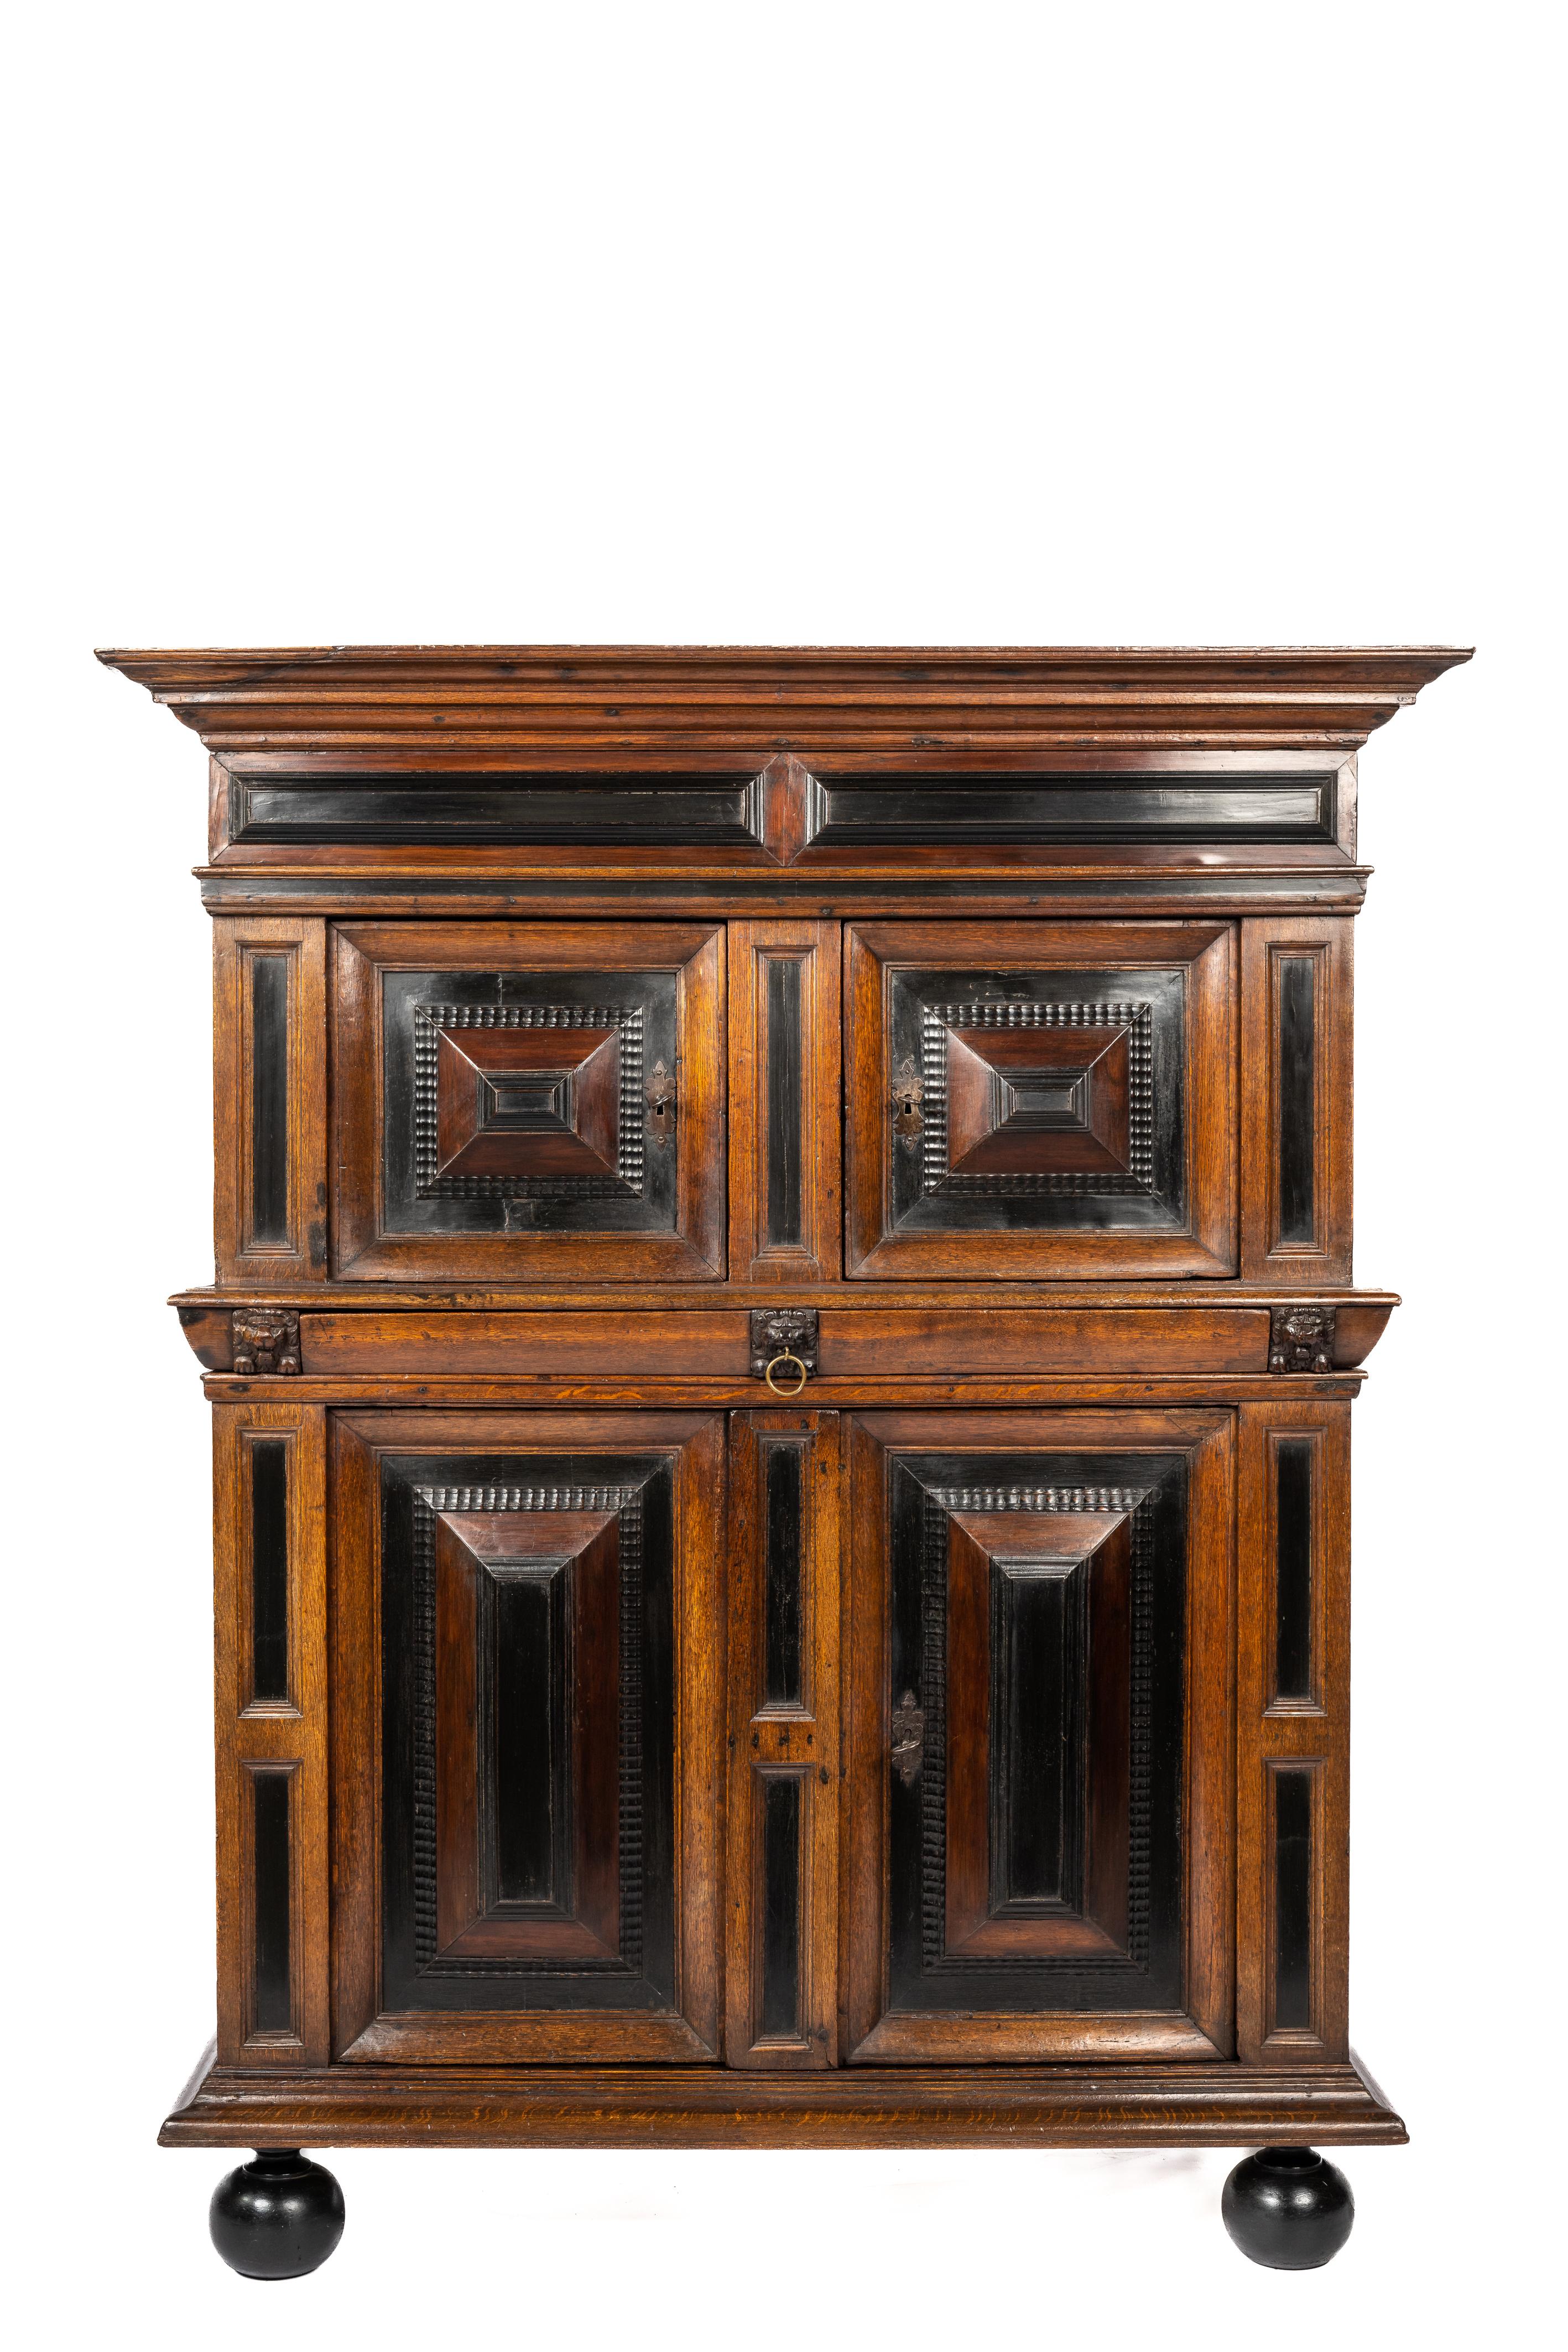 This beautiful and friendly-sized cupboard is made of the finest watered oak in the tradition of the Dutch Renaissance during the “Dutch golden age” It is a two-story four-door cabinet over ebonized bun feet. This cabinet is made in the Dutch